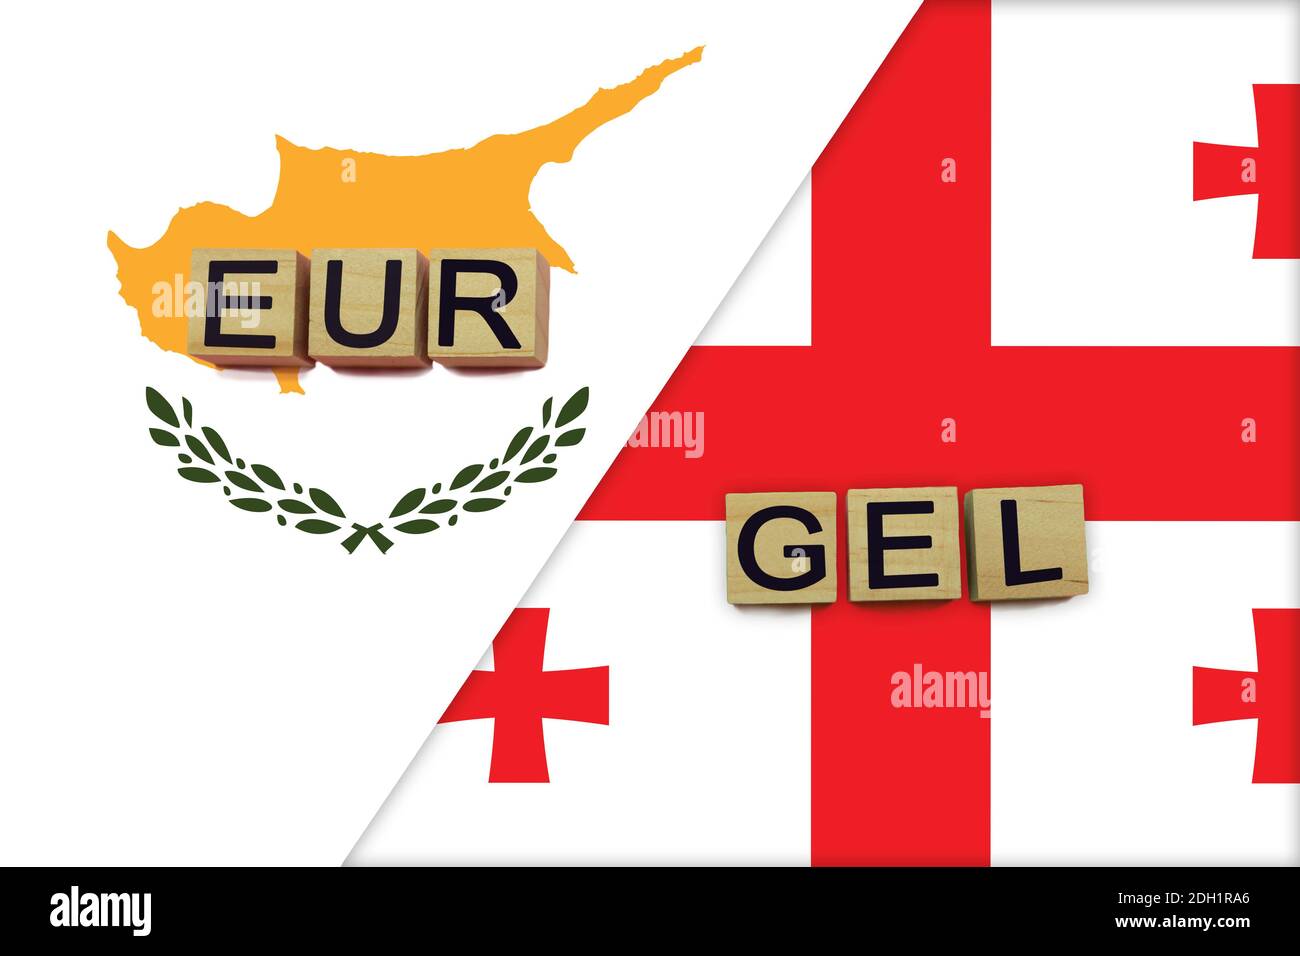 Cyprus and Georgia currencies codes on national flags background. International money transfer concept Stock Photo